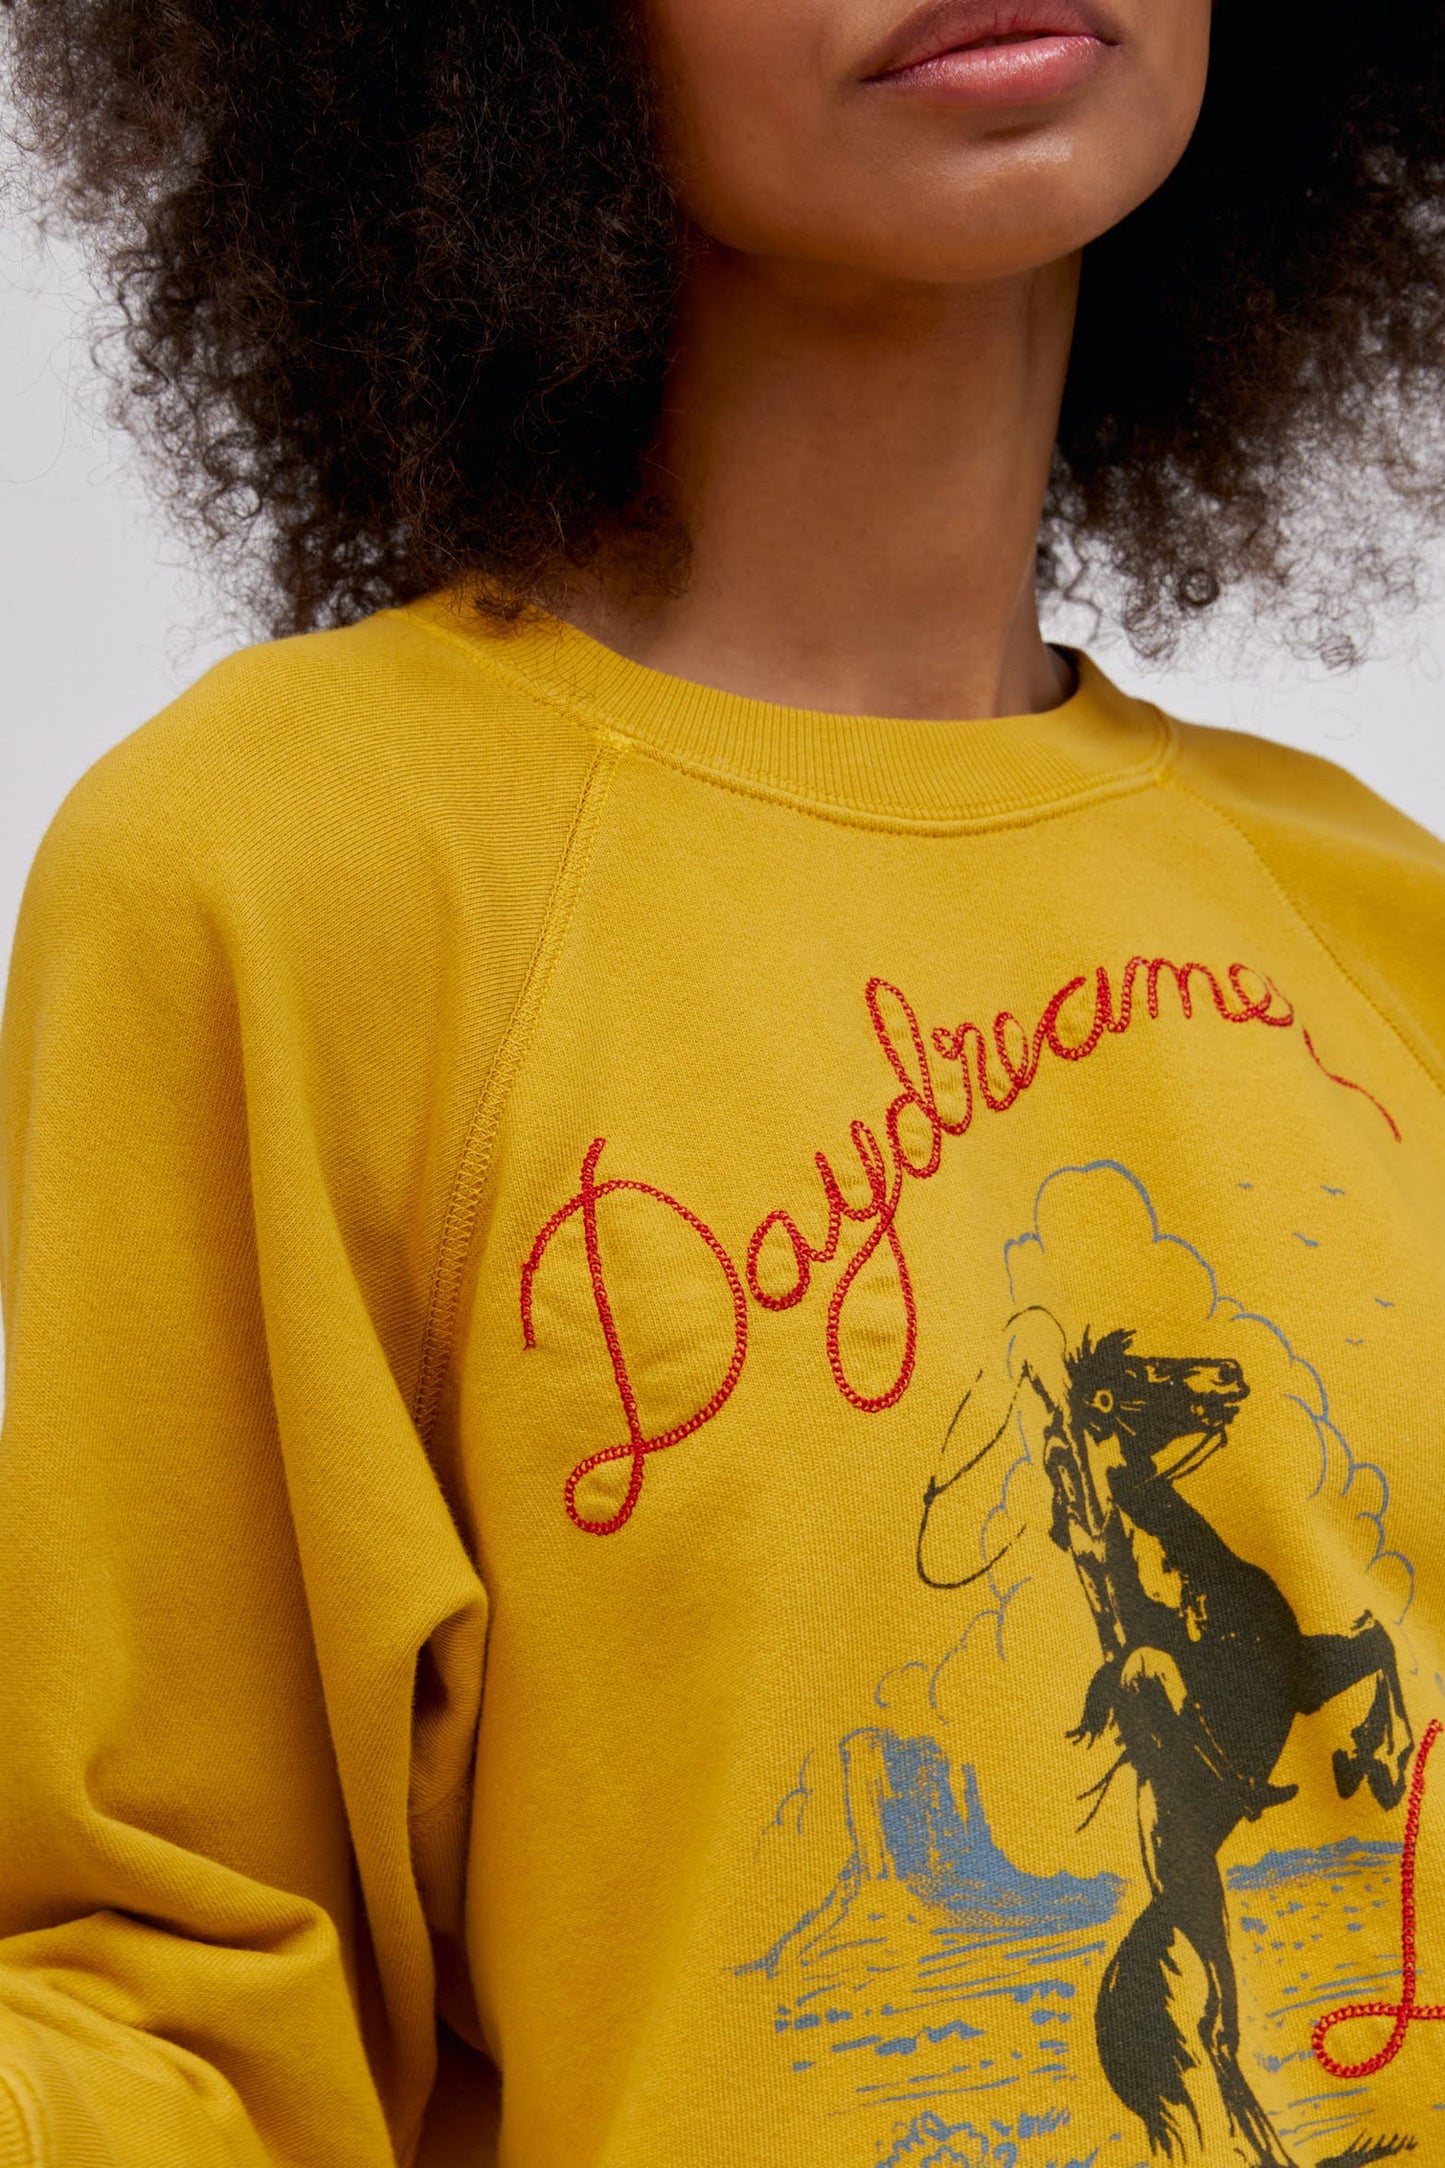 A curly-haired model featuring a raglan crew in golden daze with a bucking cowgirl graphic inspired by the spirit of the West lands on a lightweight, french terry raglan crew embroidered with lasso lettering.